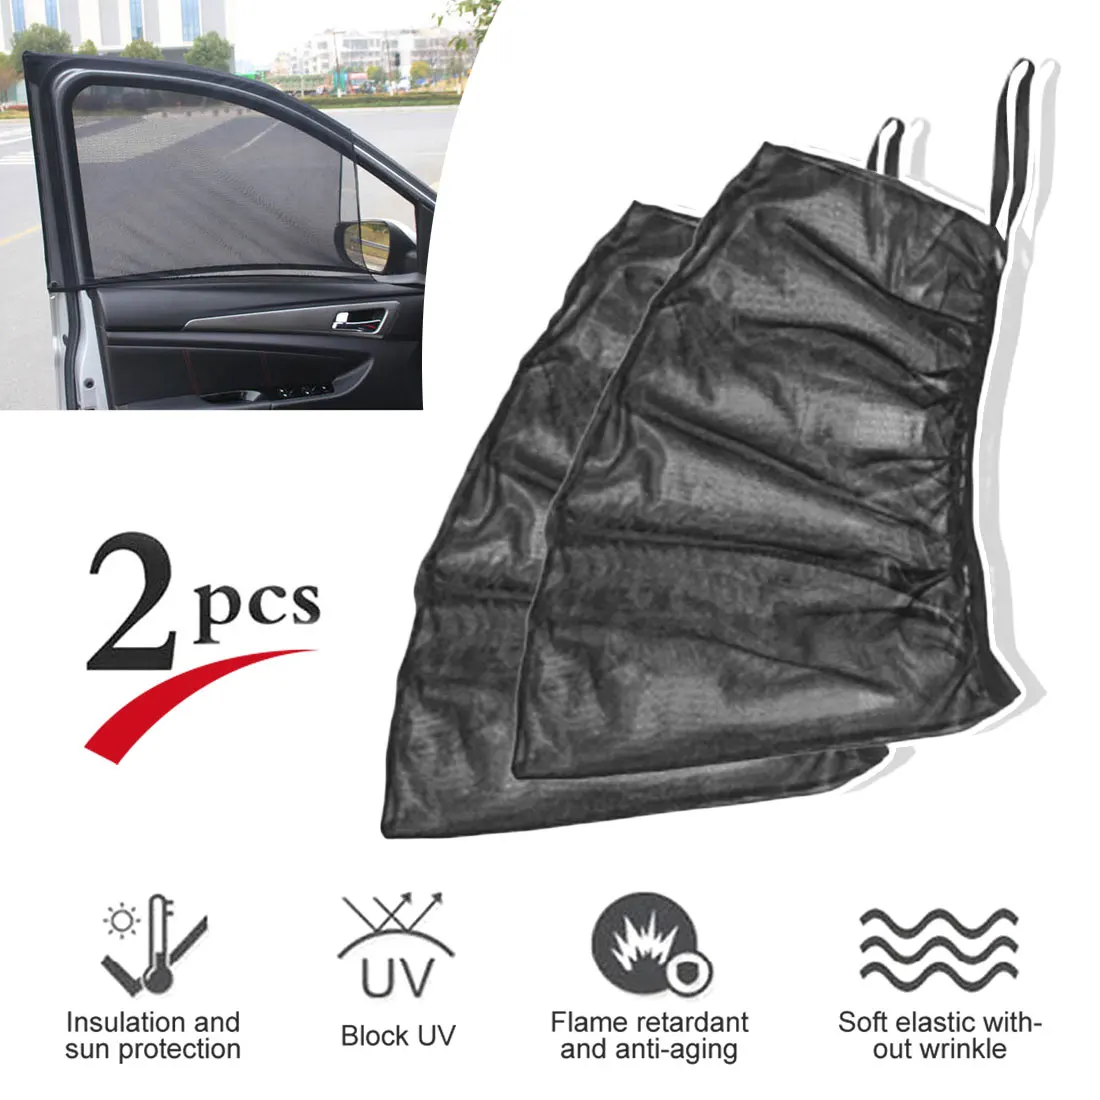 

Universal 2pcs Car Sun Shade Side Window Sunshade Cover UV Protect Perspective Mesh Windows Can Be Open Car Accessories